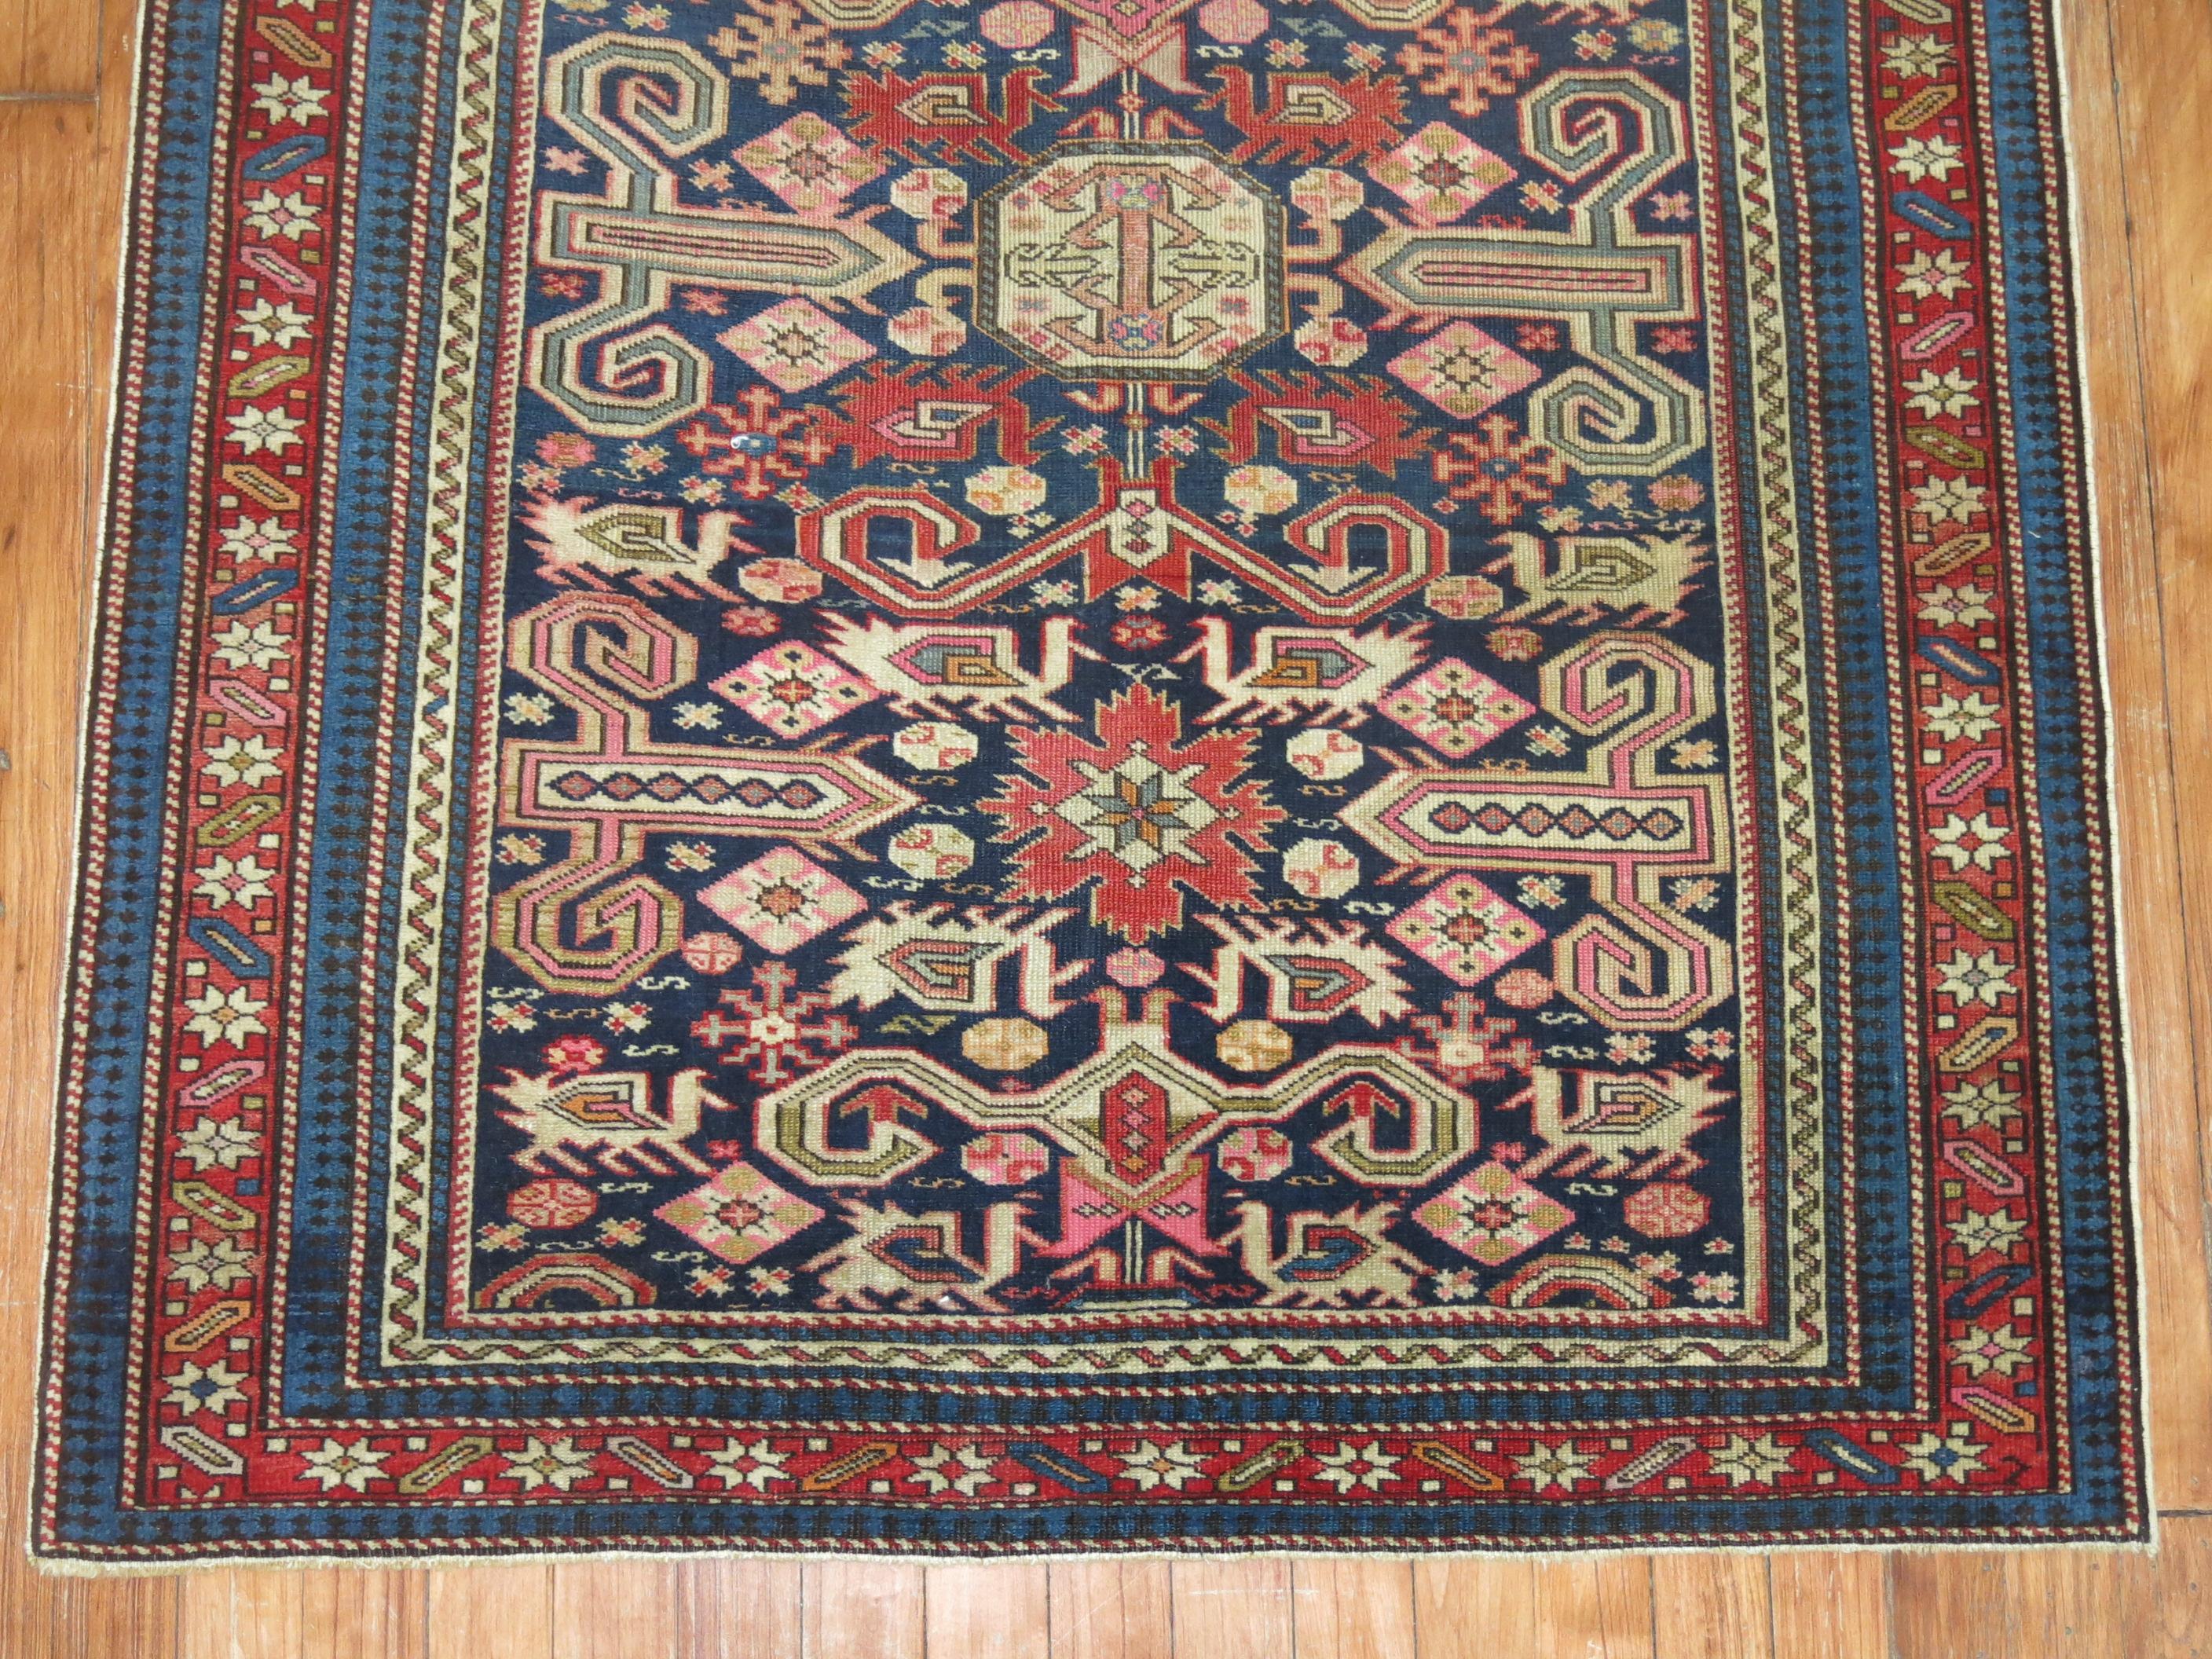 A geometric tribal looking Caucasian Shirvan rug from the late 19th century. 

Measures: 3'3” x 4'3”

Antique Caucasian rugs from the Shirvan district village are still considered one of the best decorative and collector type of rugs from that